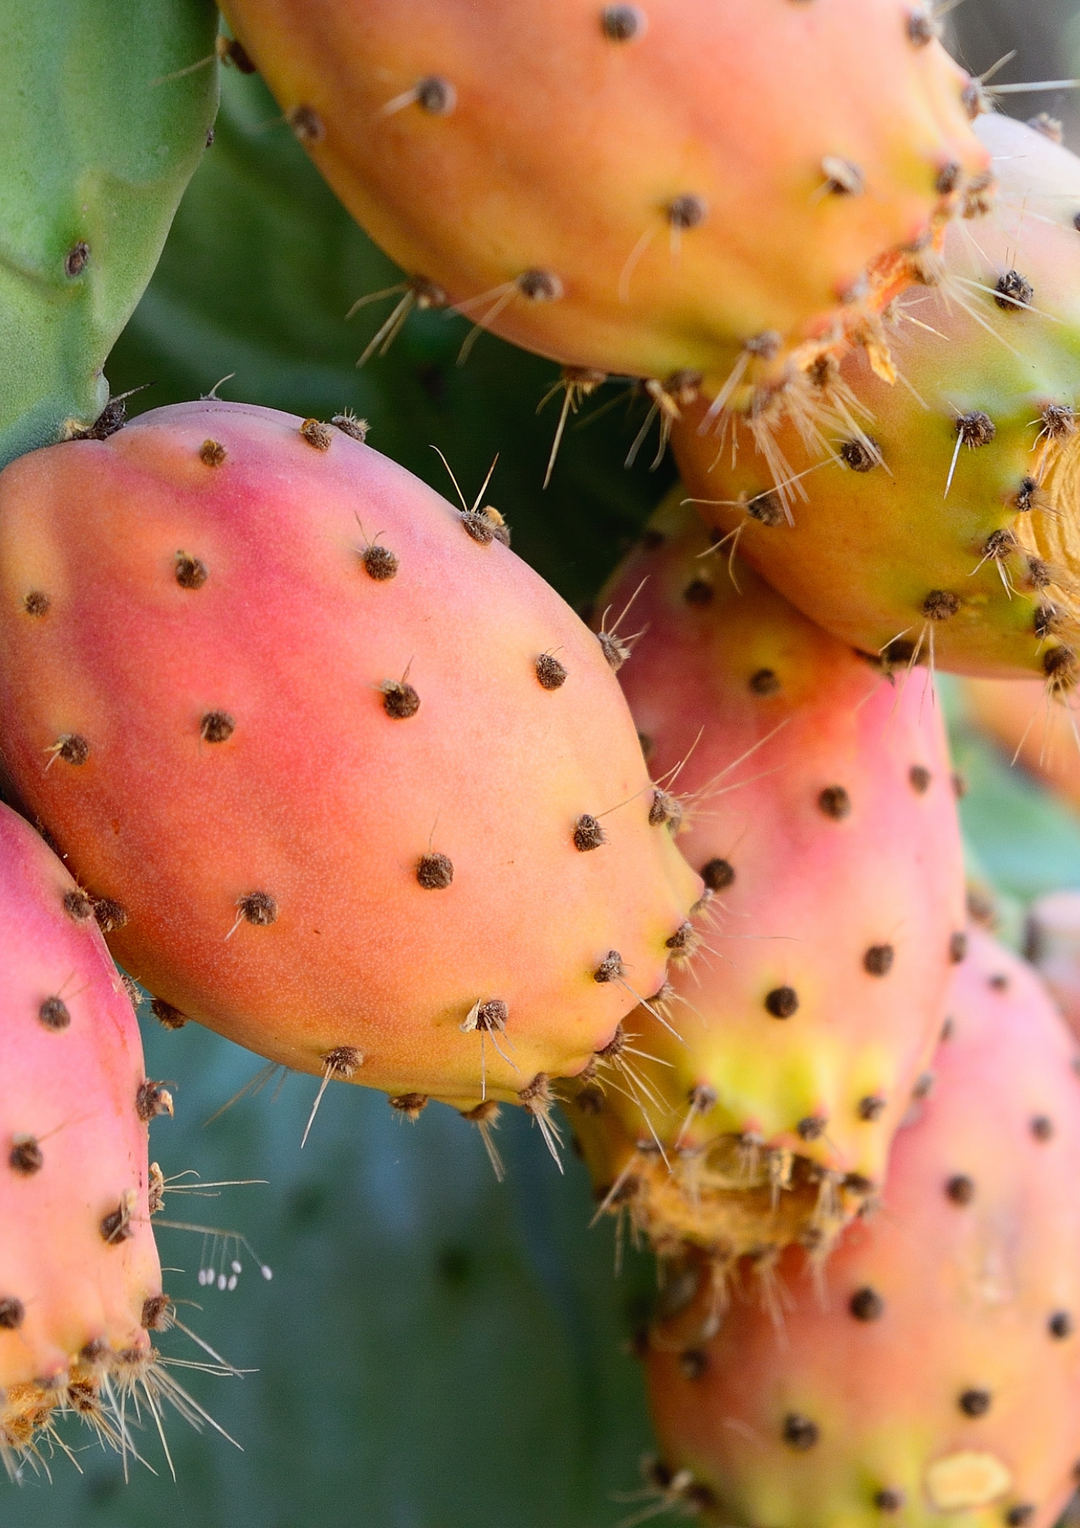 prickly pear oily skin acne rosace linoeic and oleic acids vitamin c and k